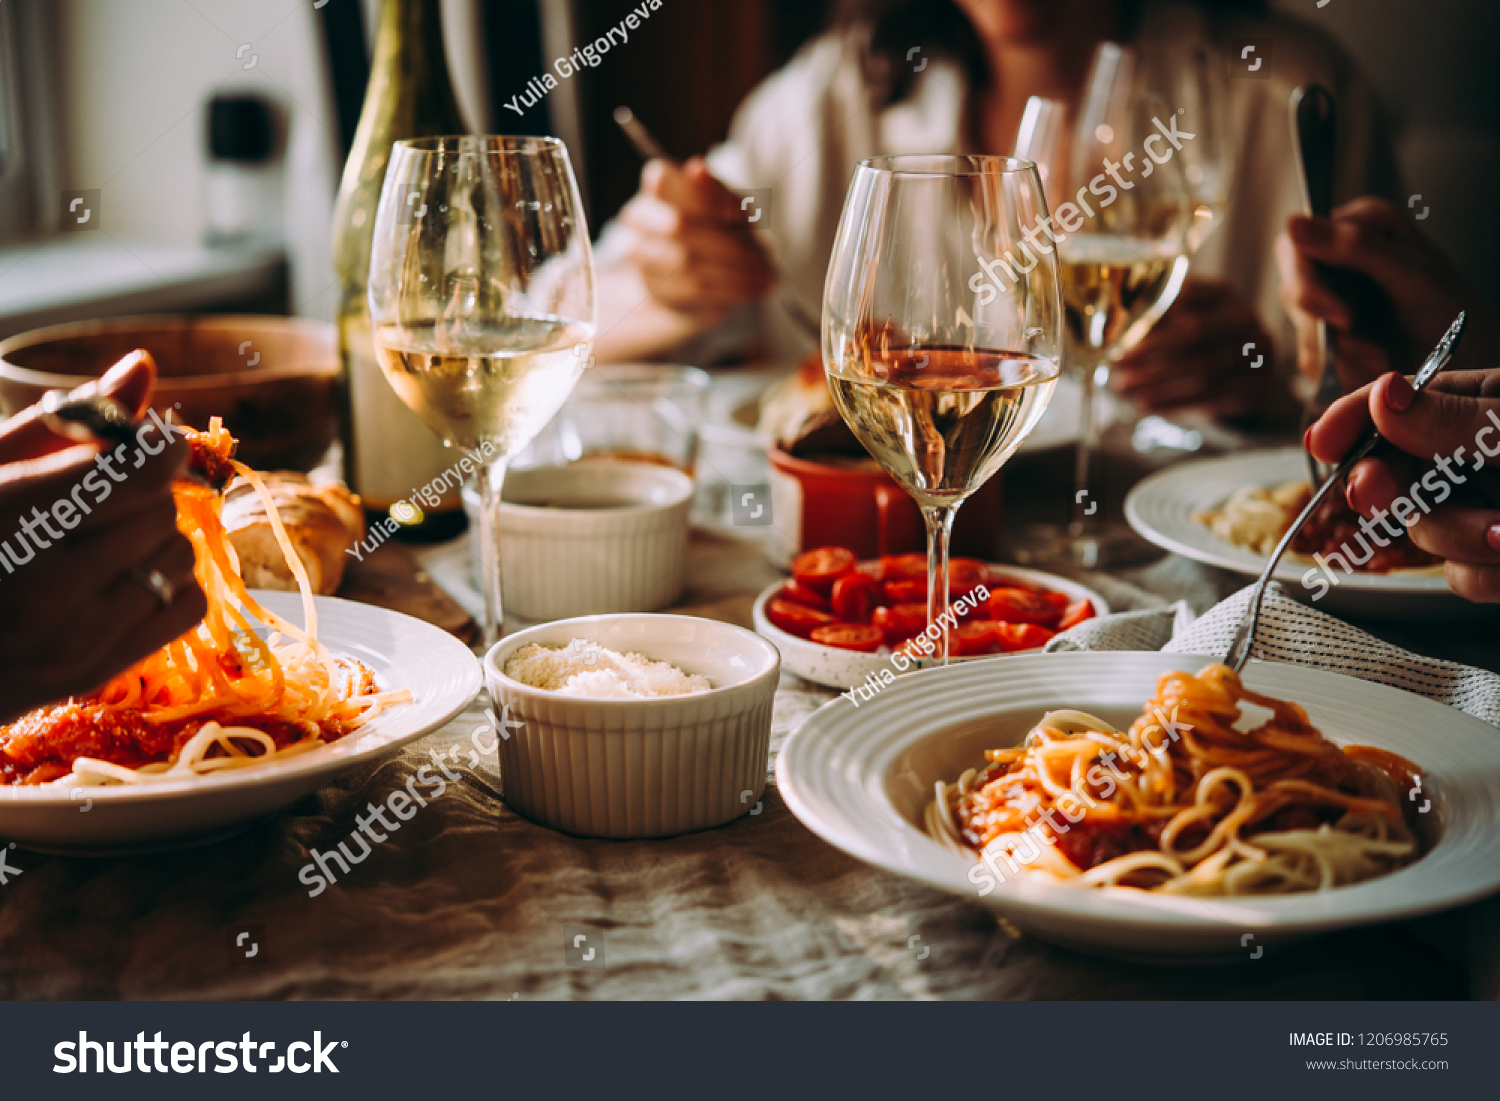 Friends having a pasta dinner at home of at a restaurant. #1206985765